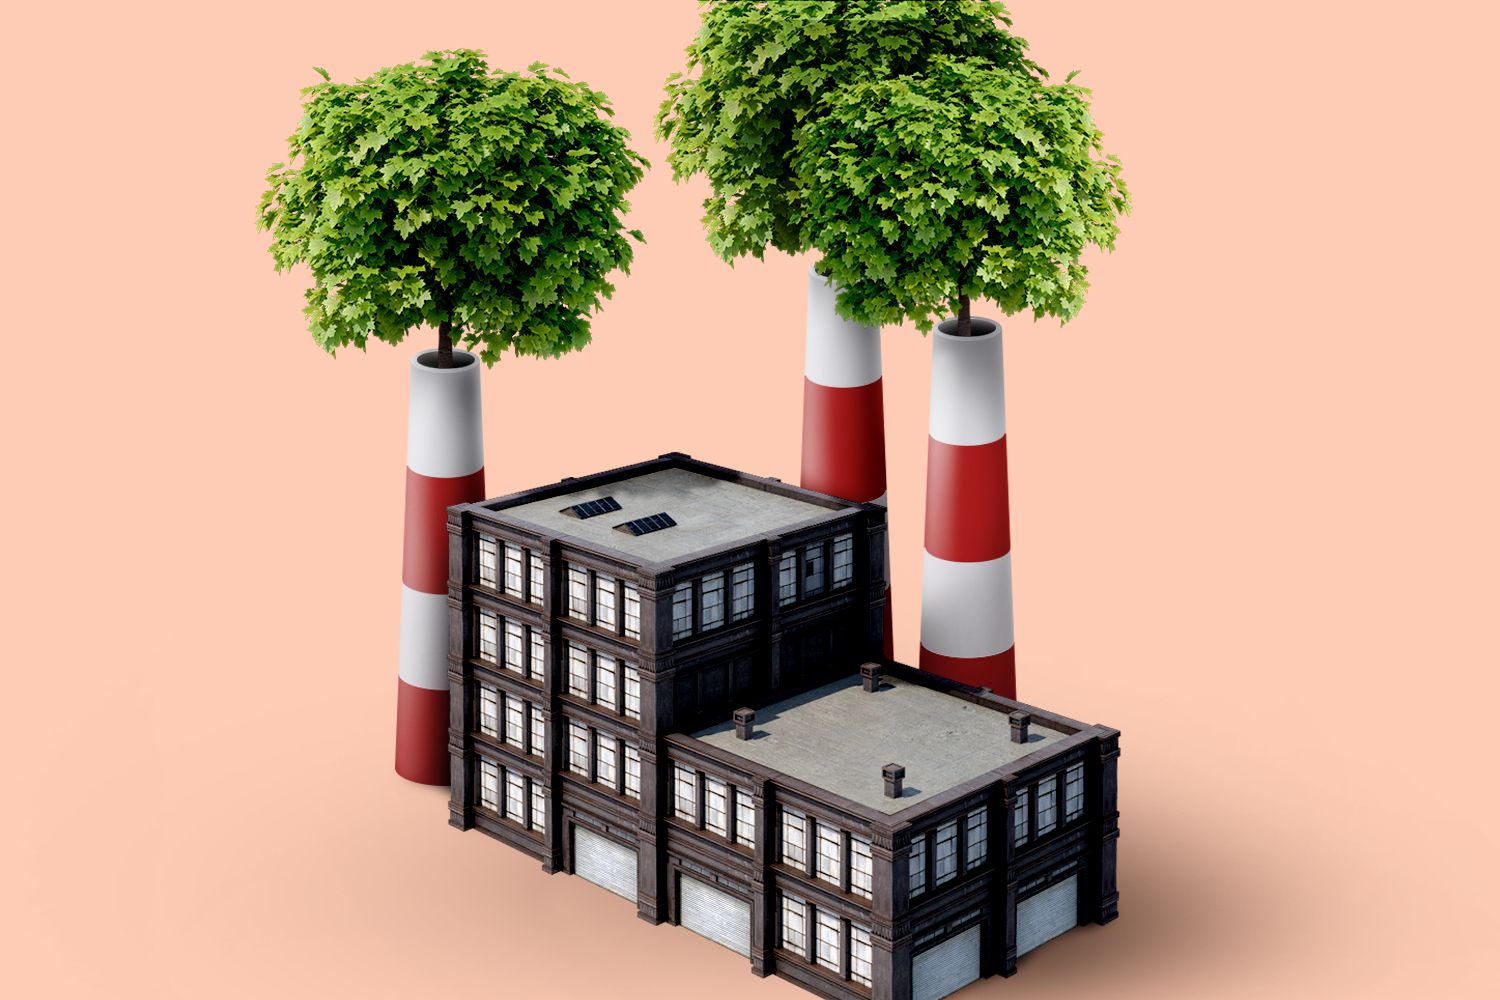 image of building with trees growing out of smokestacks